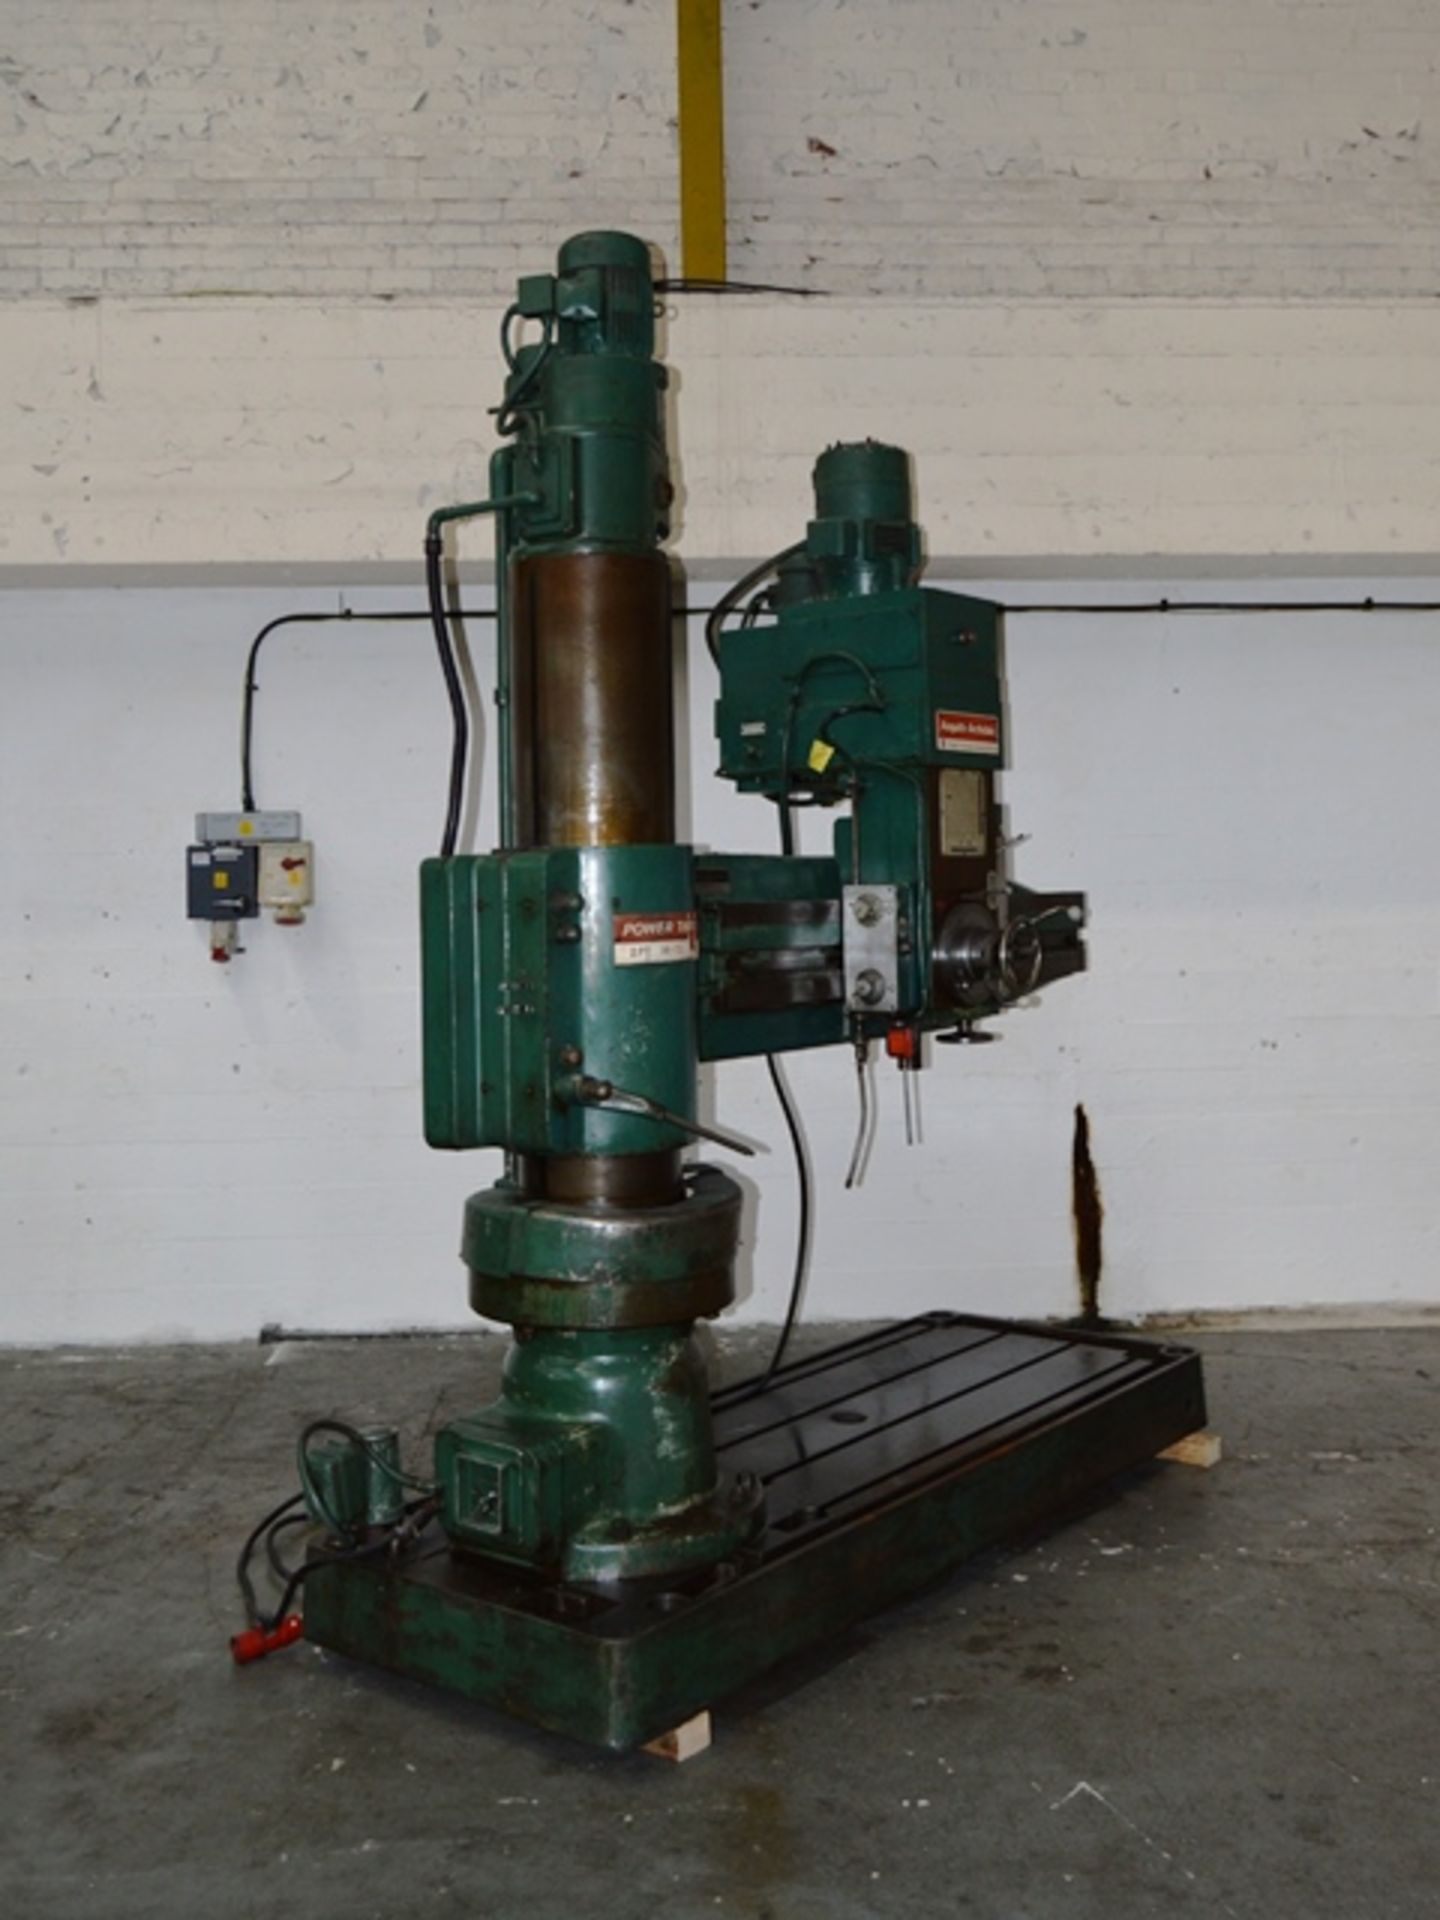 Asquith Power Thrust 6' Radial Arm Drill (1971) - Image 2 of 9